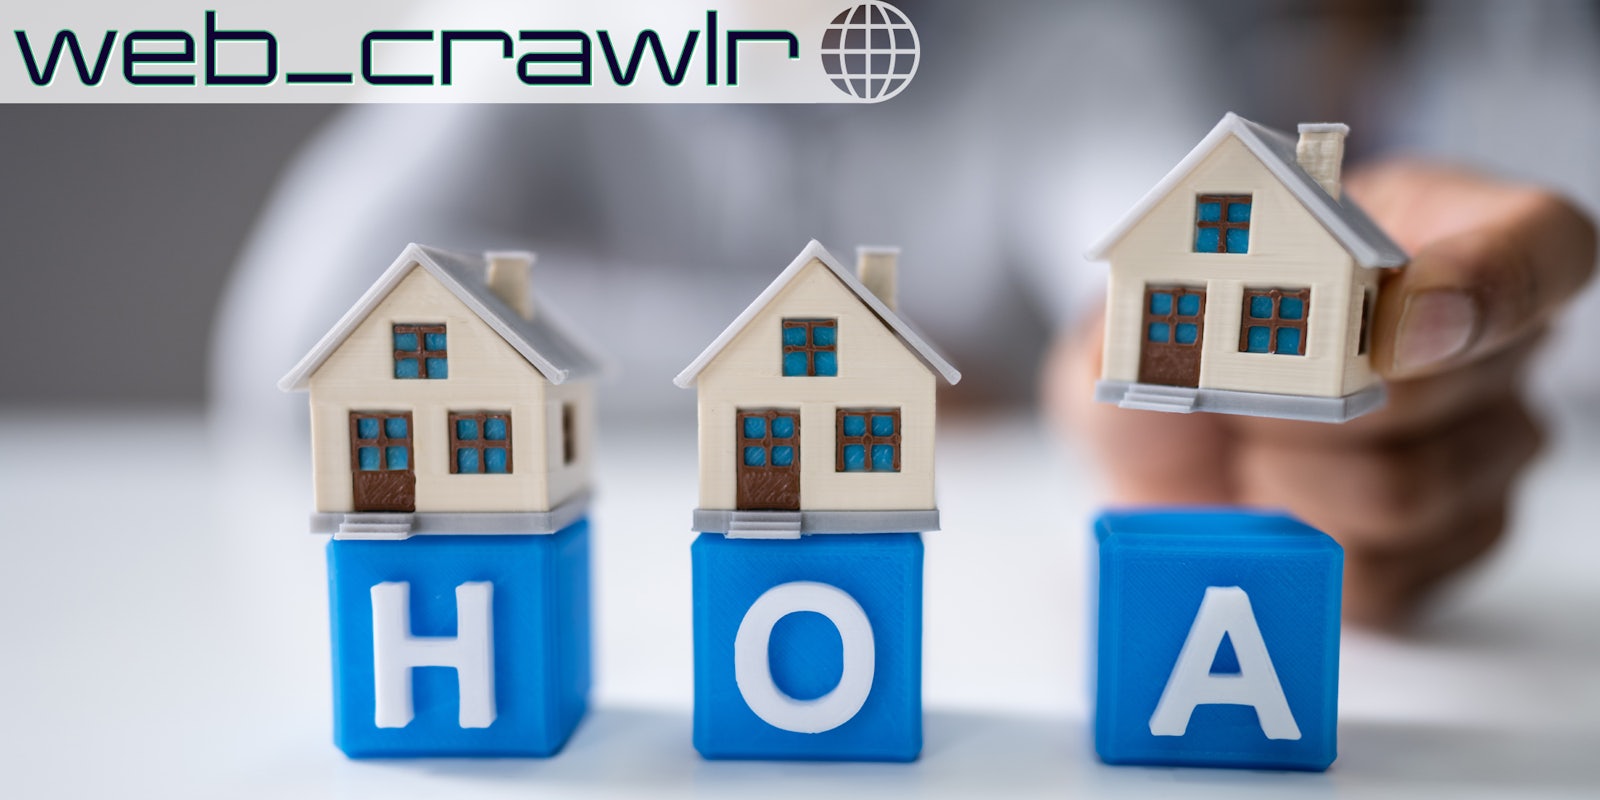 Blocks with the letters HOA on them. Little houses are being placed on the blocks. The Daily Dot newsletter web_crawlr logo is in the top left corner.